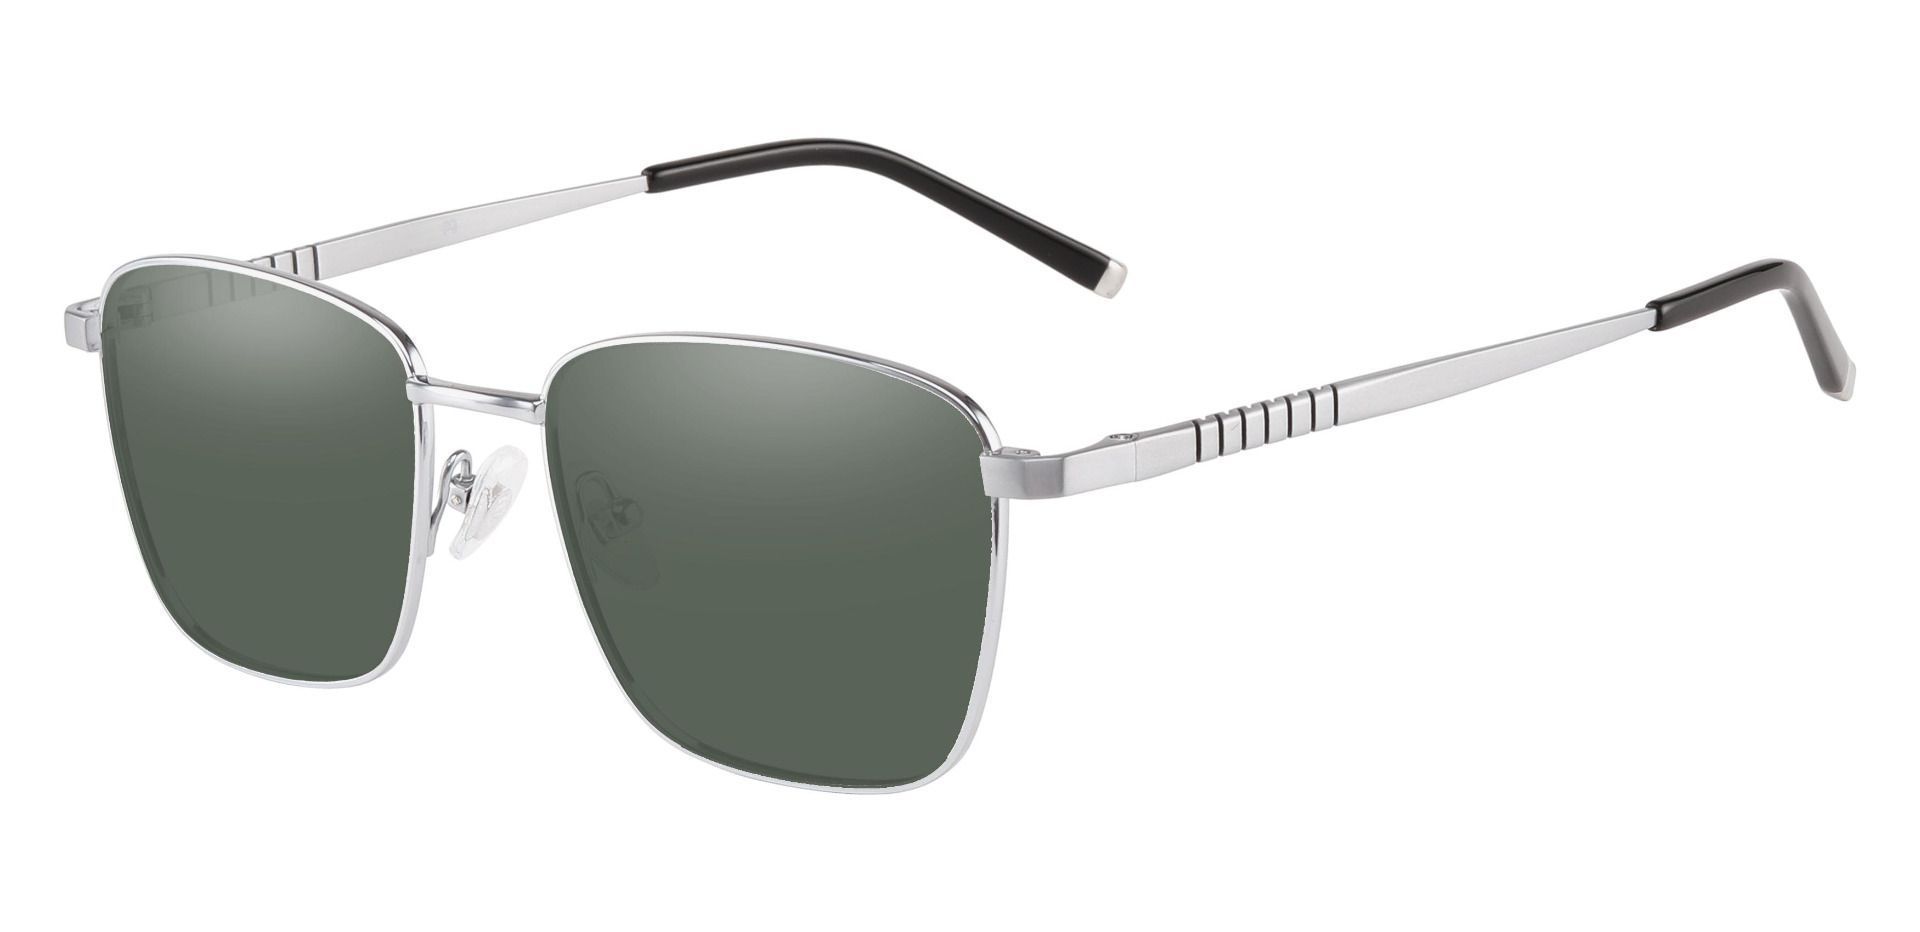 May Square Non-Rx Sunglasses - Silver Frame With Green Lenses